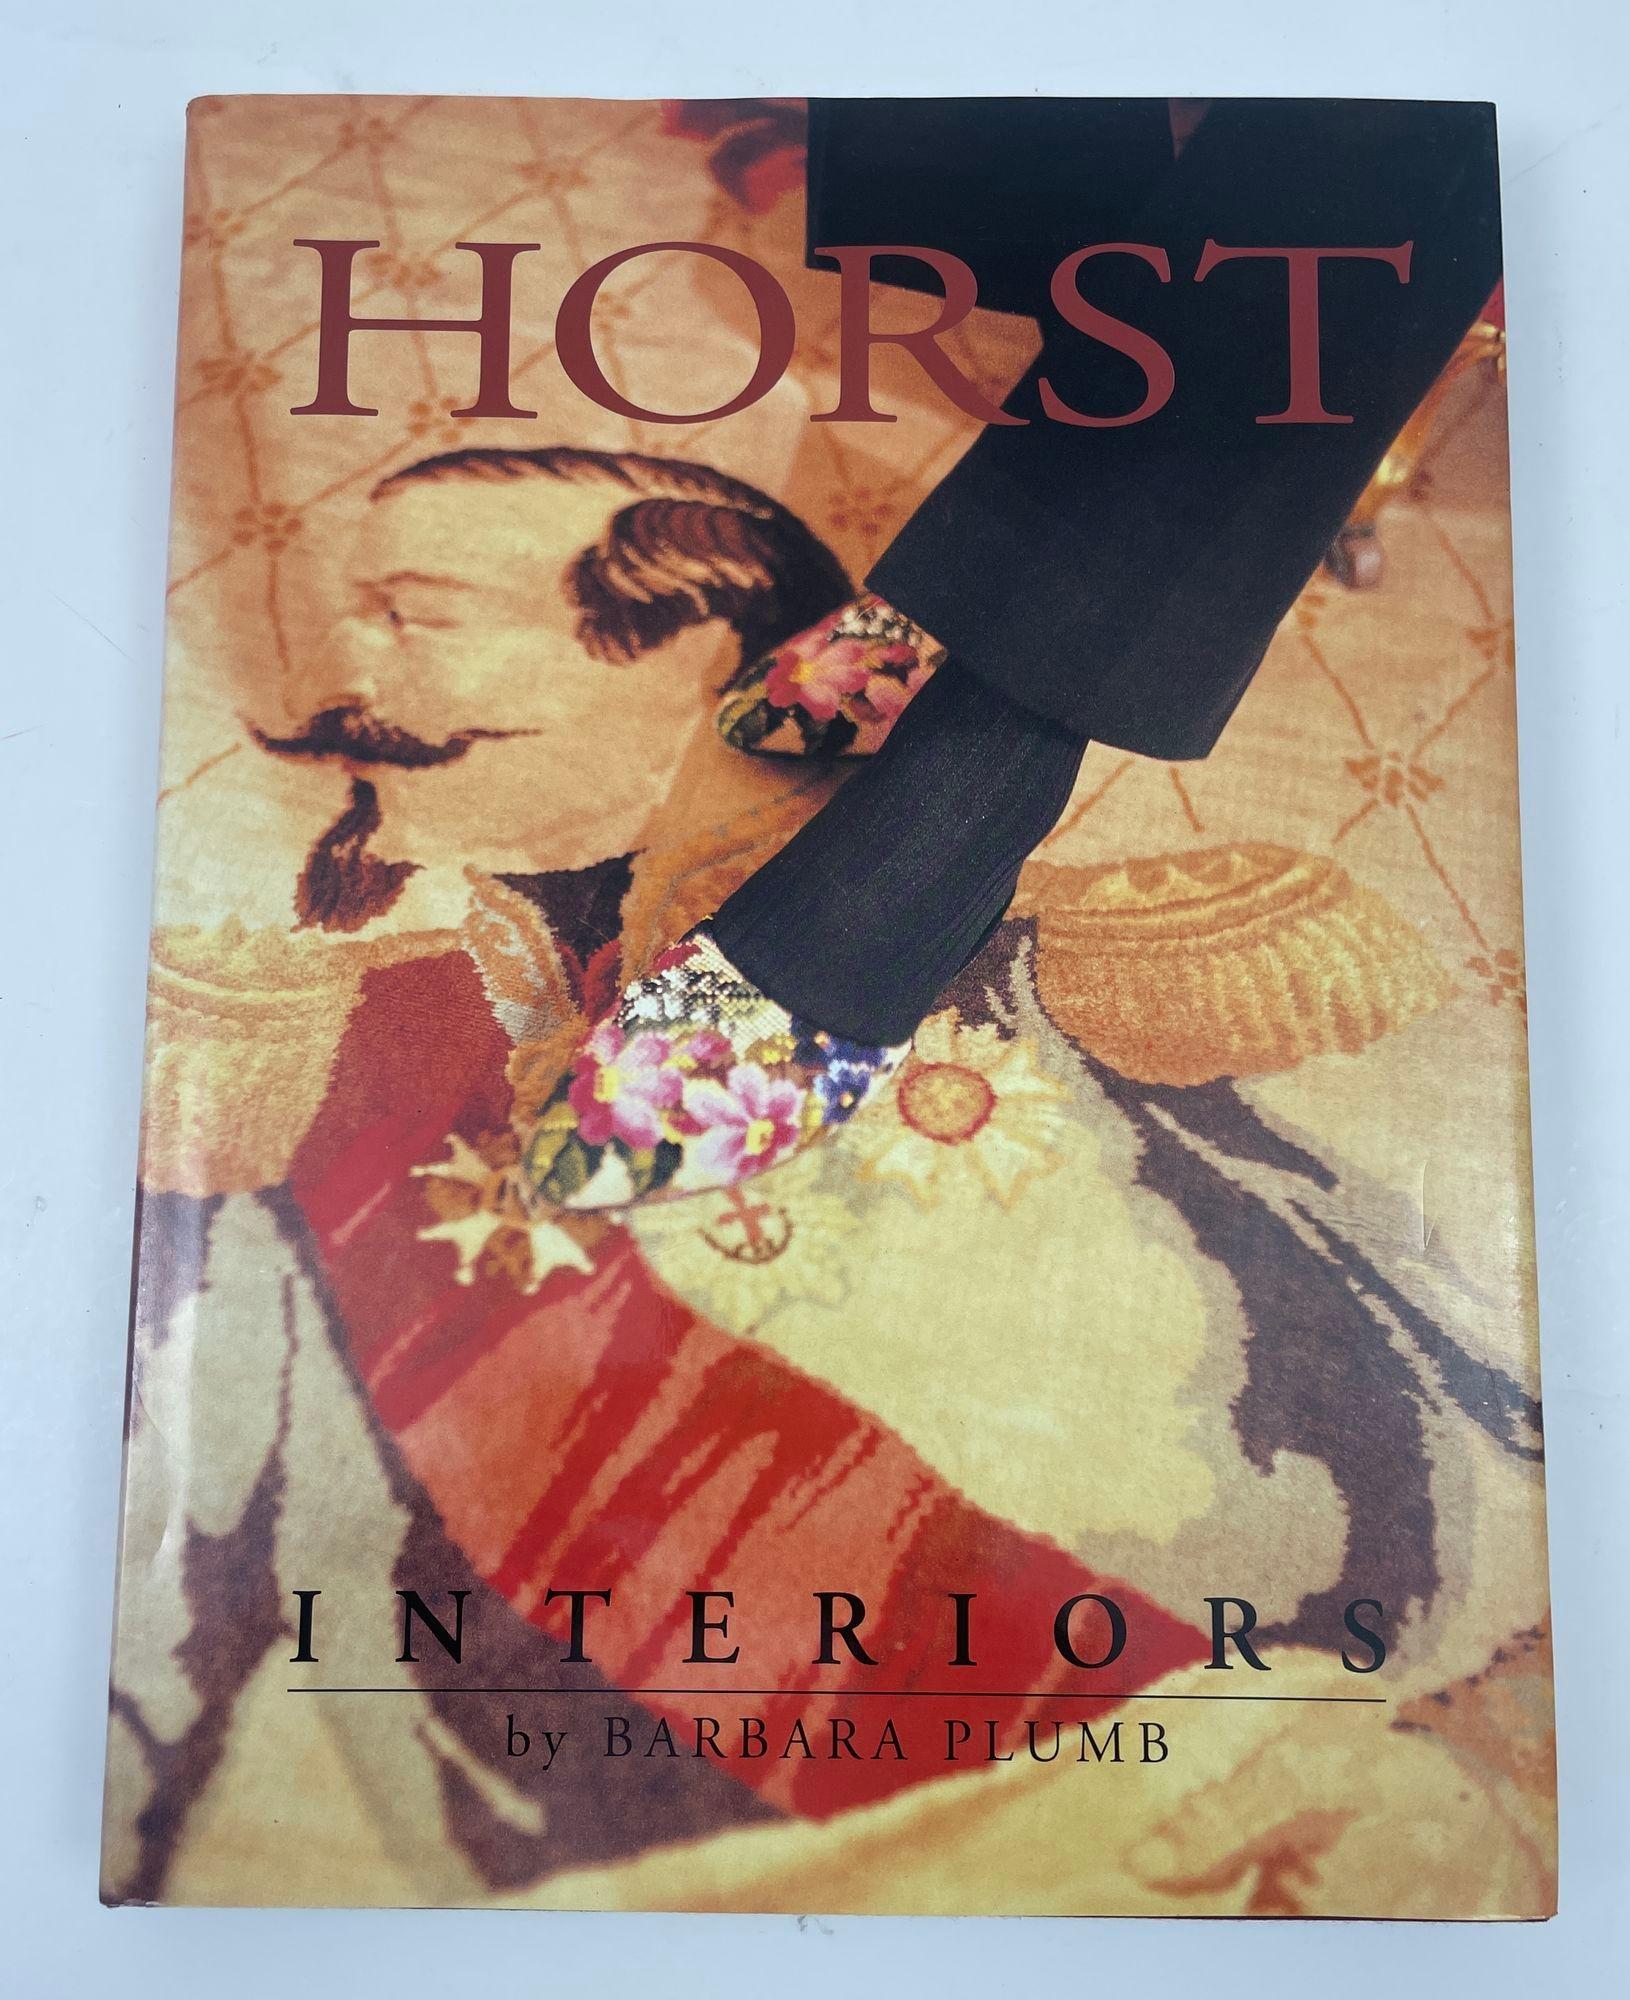 Horst Interiors by Barbara Plumb Hardcover Coffee Table Book 1993 First Edition.A beautiful monograph of the photographs of Horst P Horst’s by Barbara Plumb. Featuring the social and celebrity glitterati in both Europe and America. Originally shot